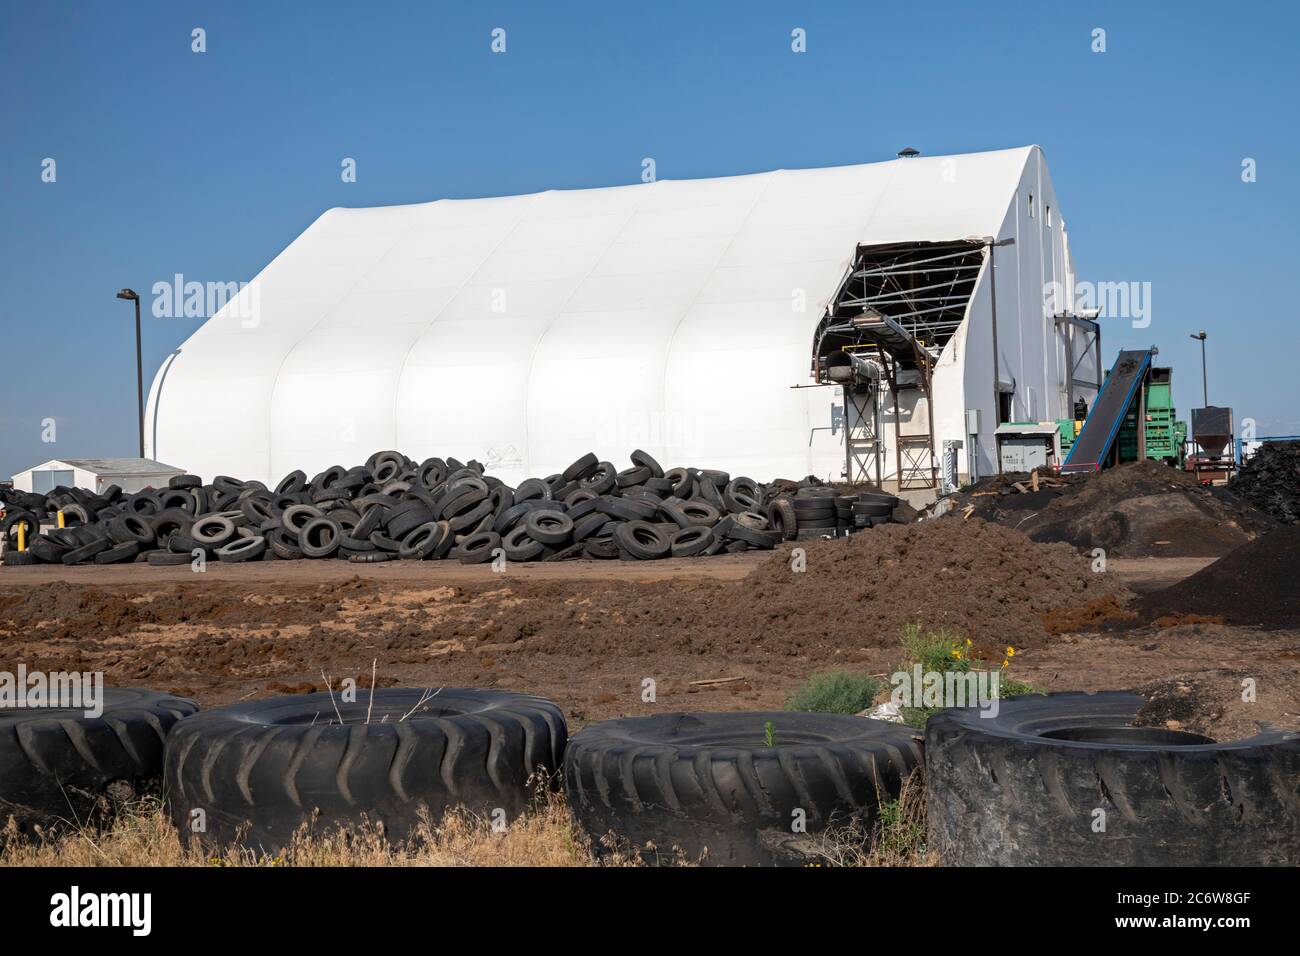 Hudson, Colorado - The CH2E tire recycling center northeast of Denver. The tires are recycled into materials used for a variety of industrial and comm Stock Photo